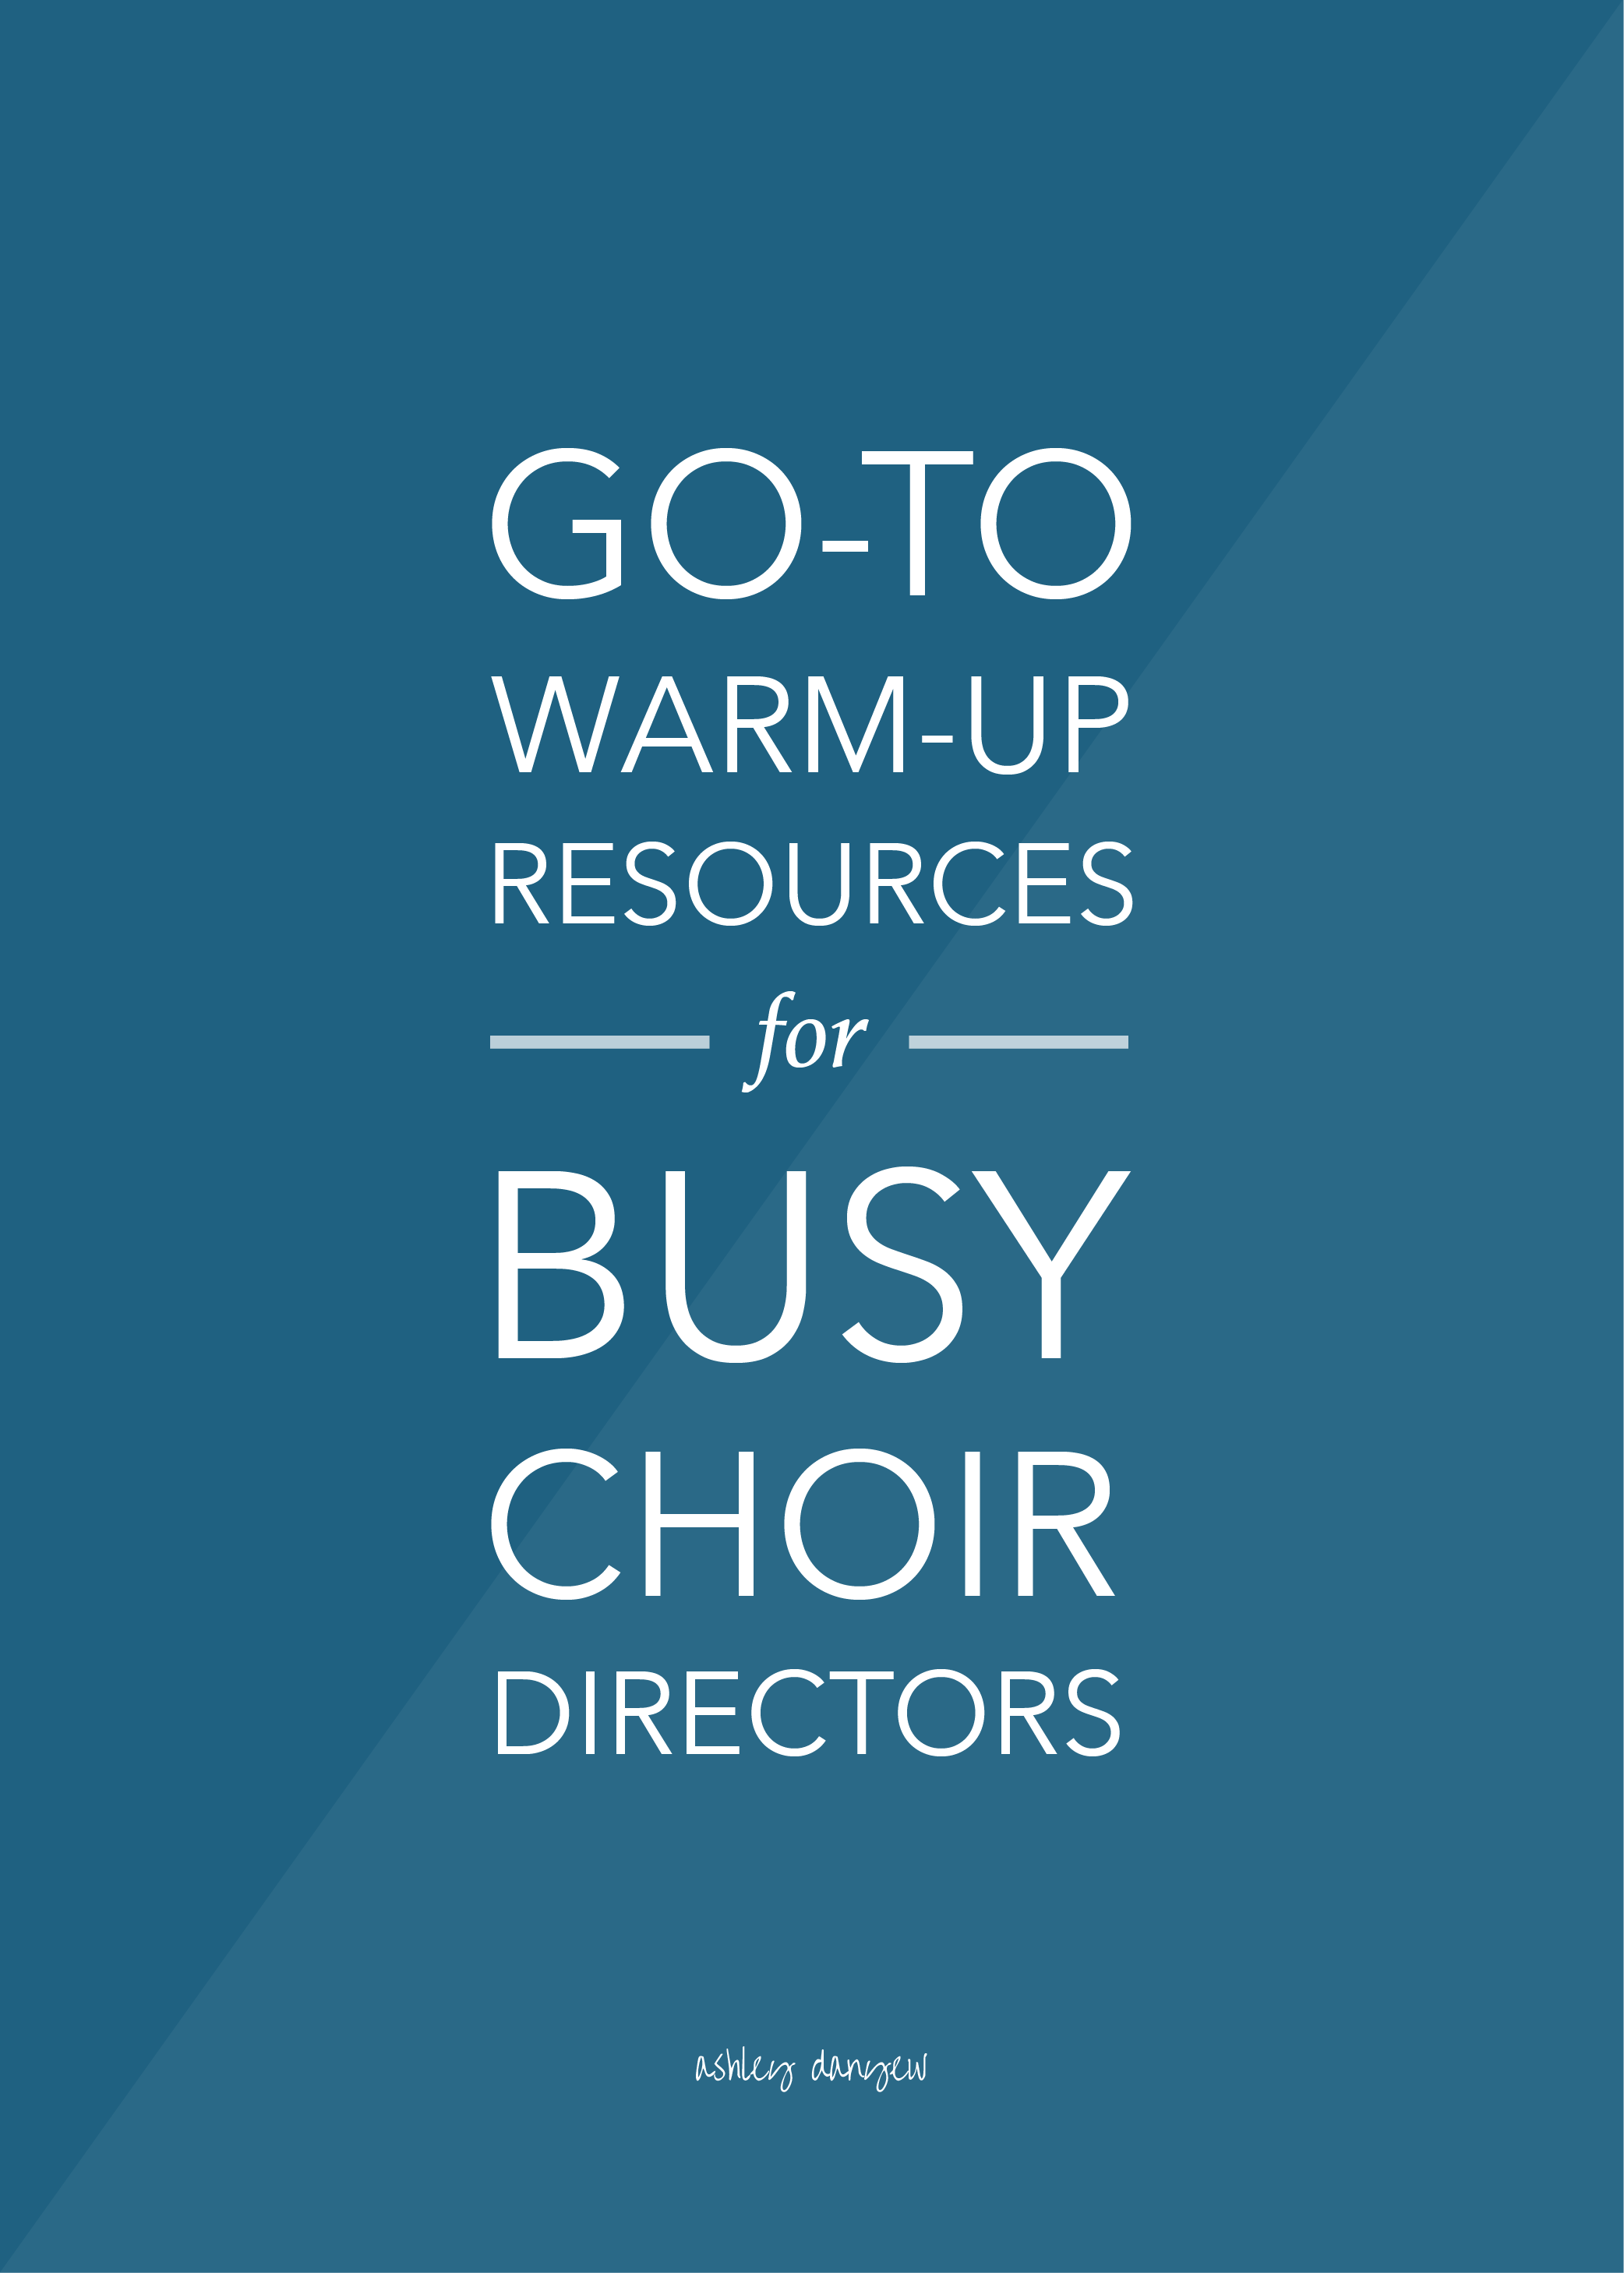 Go-To Warm-Up Resources for Busy Choir Directors